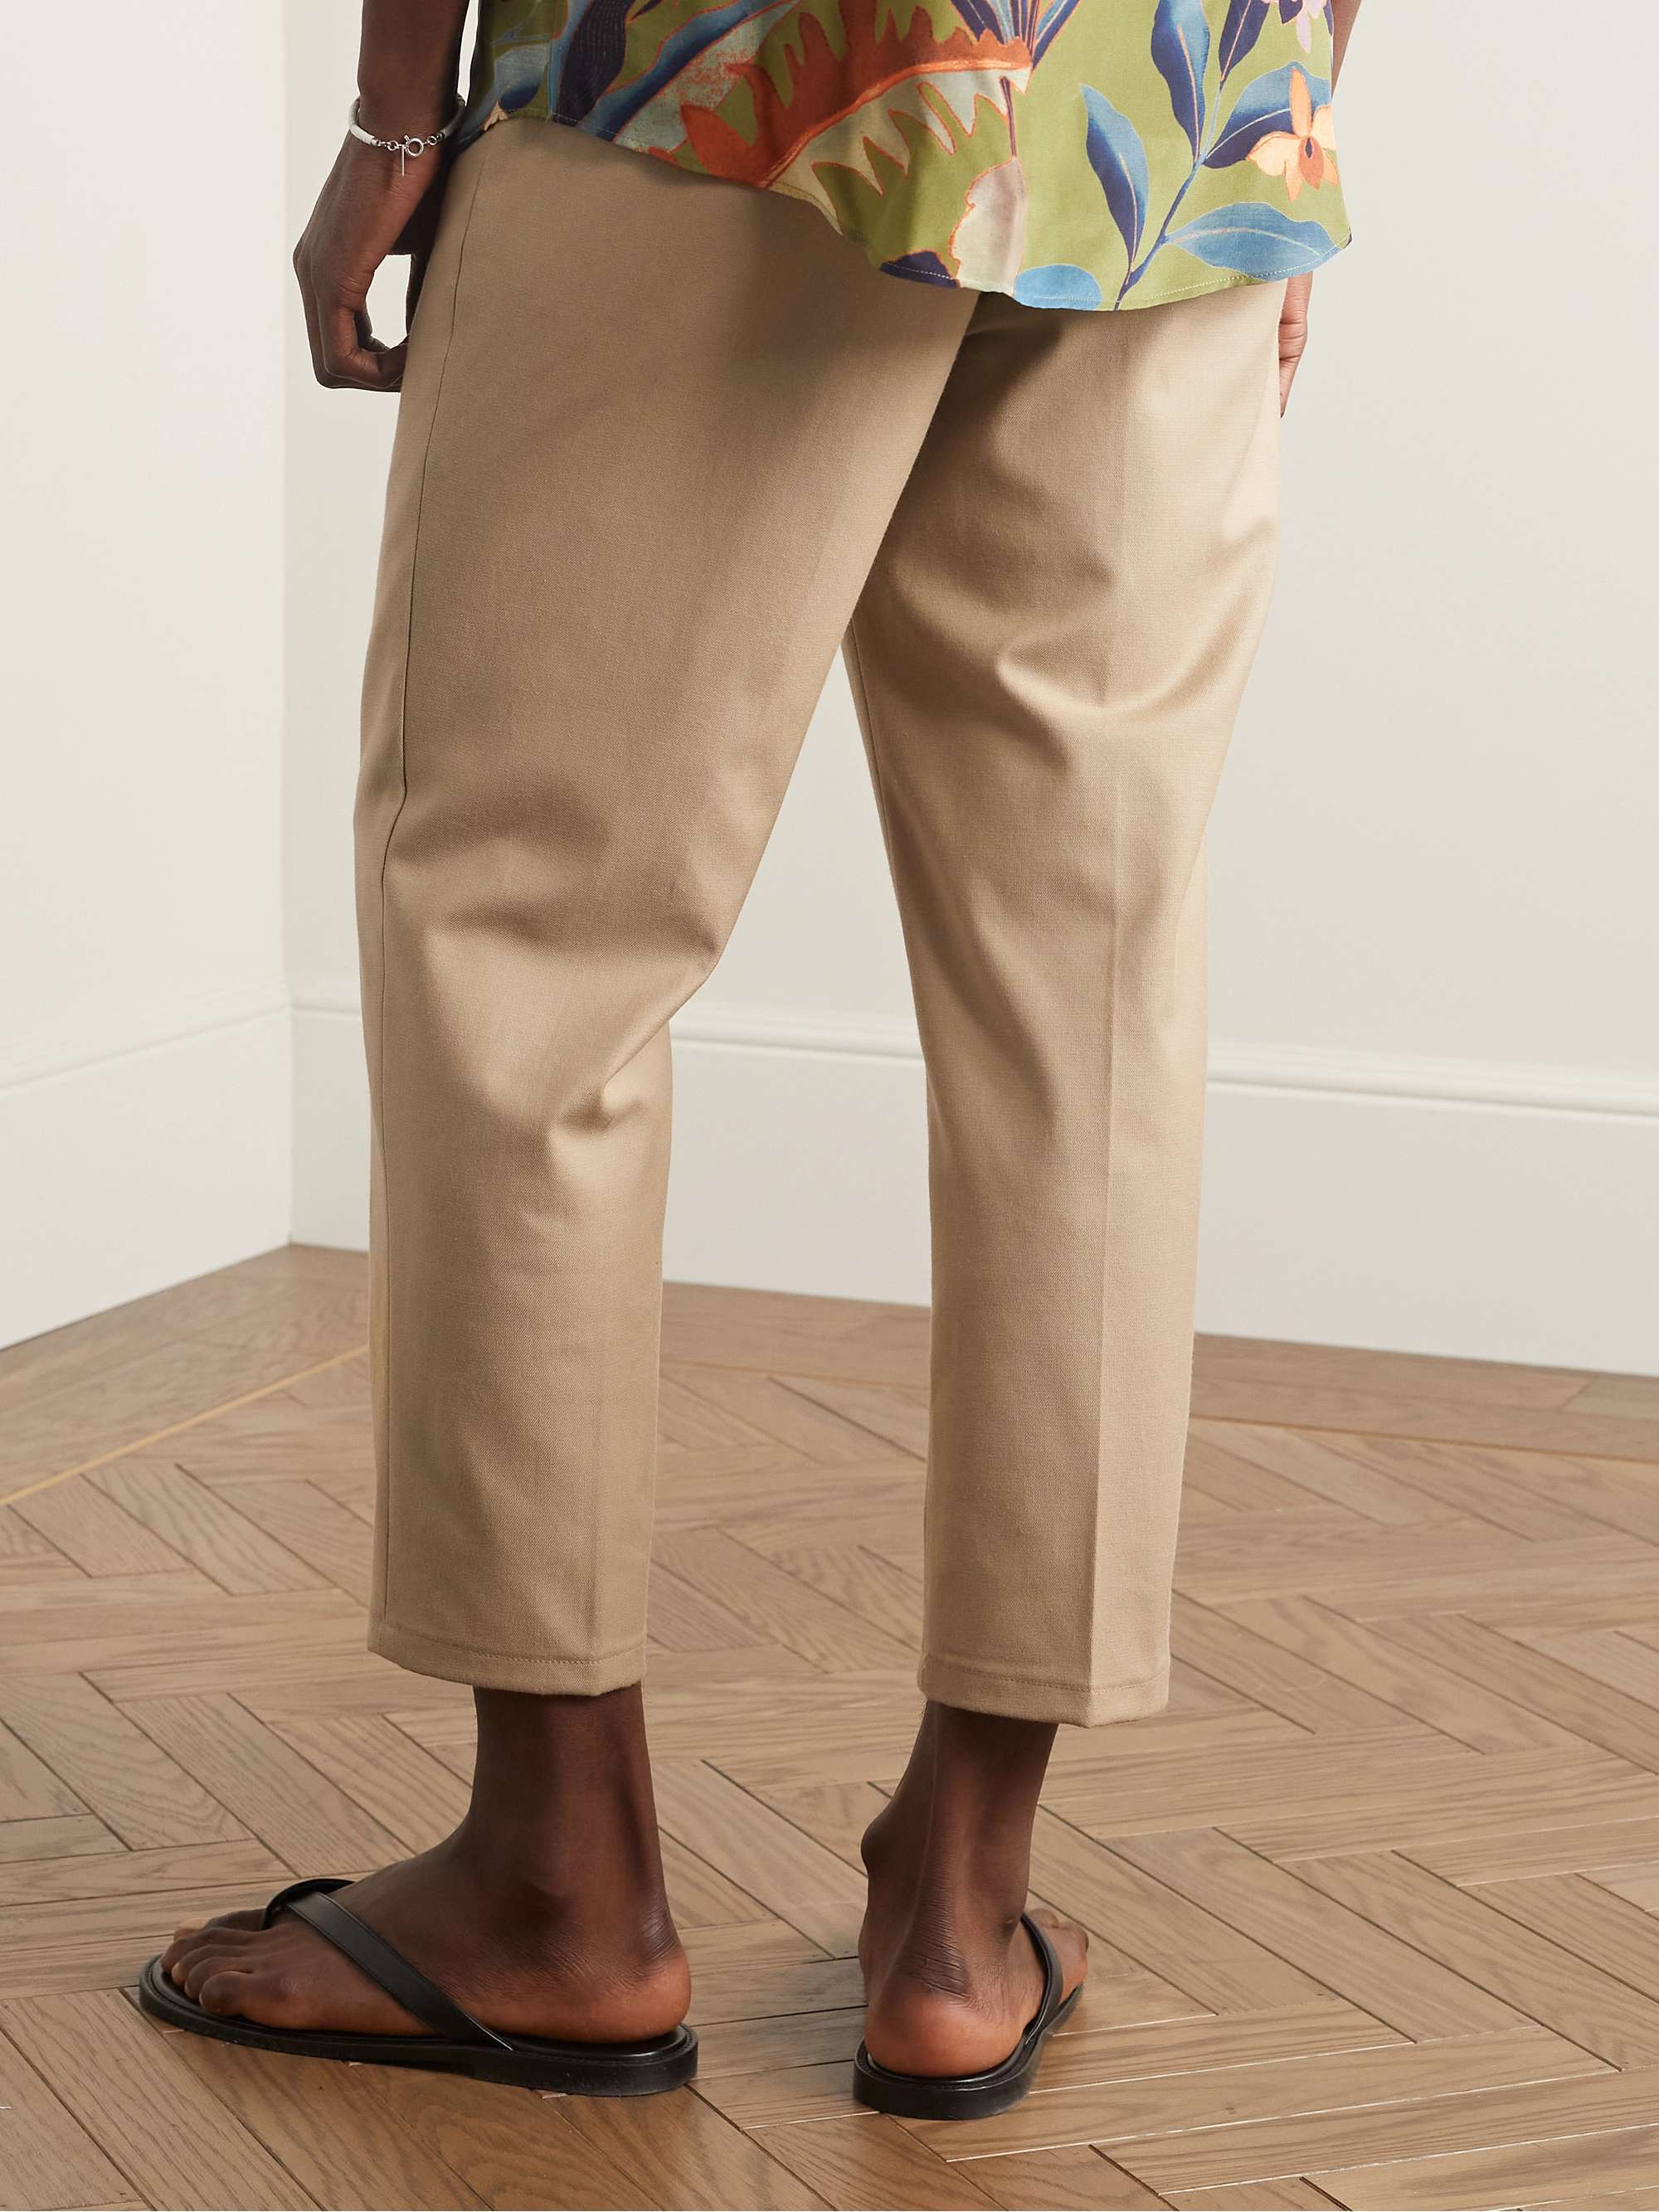 ETRO Tapered Wool-Blend Twill Drawstring Trousers